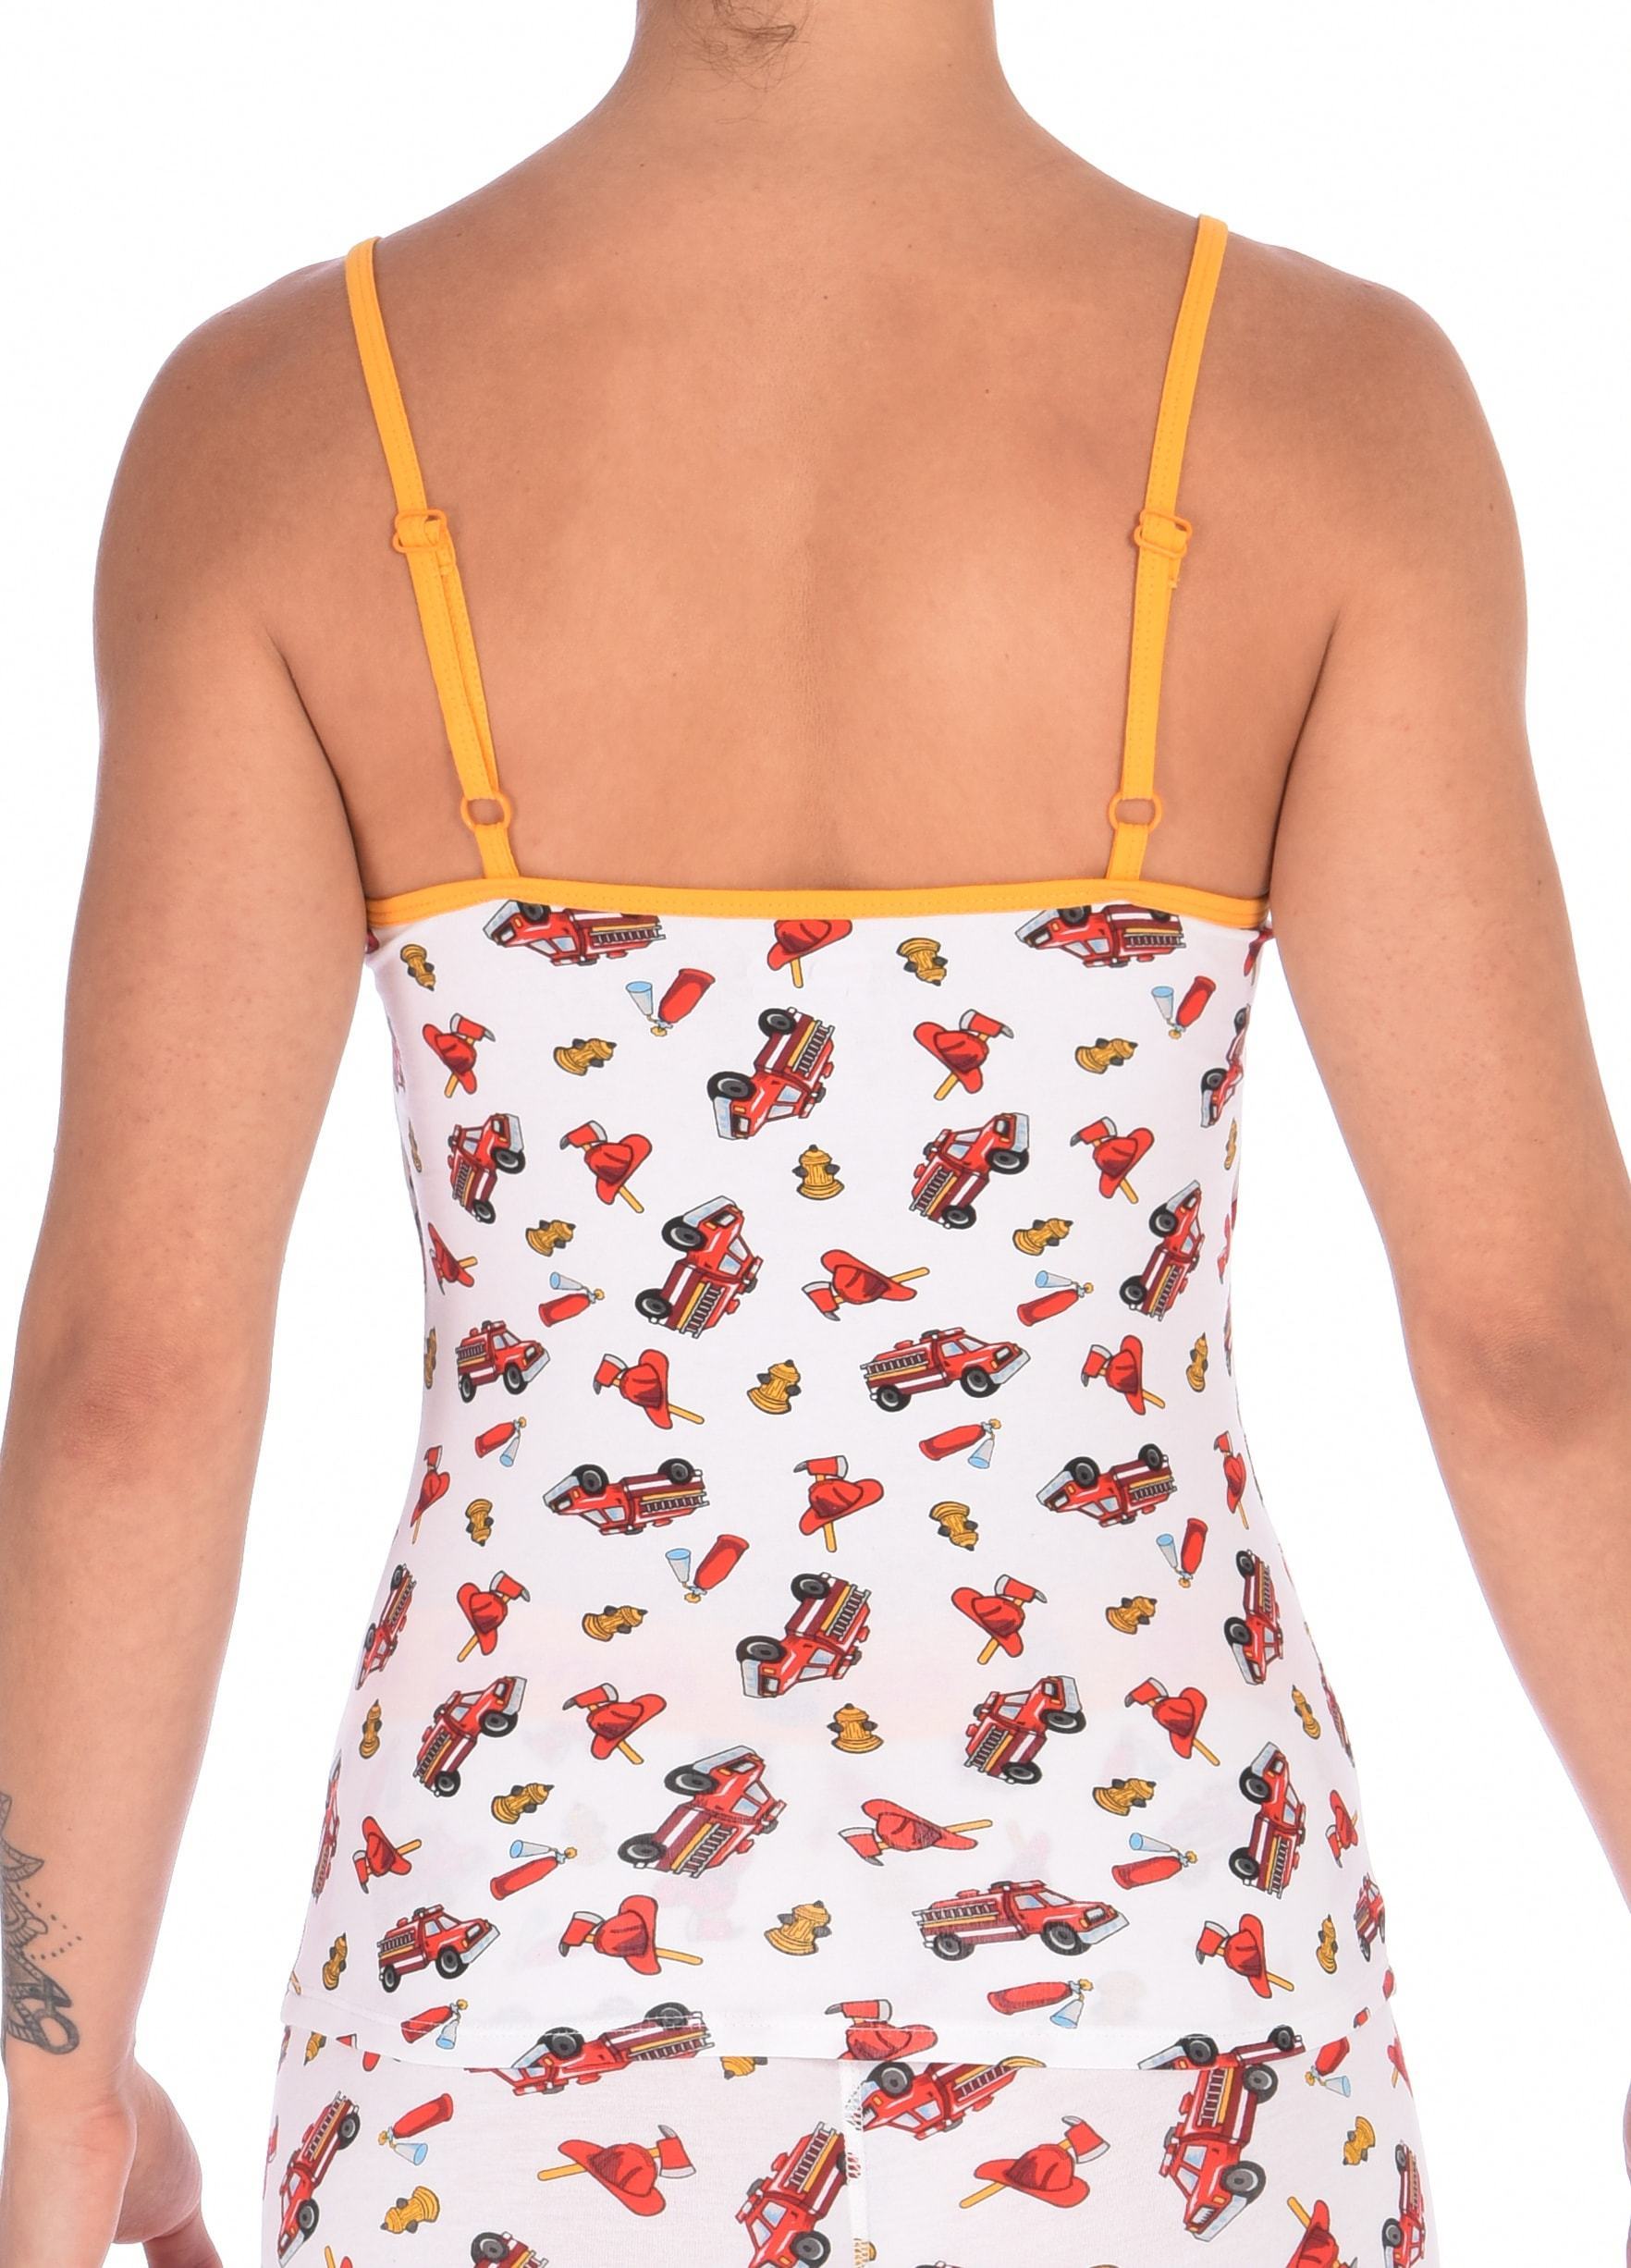 Ginch Gonch GG Fire Fighters camisole cami spaghetti strap women's underwear y front white fabric with fire engines hats and hydrants, yellow trim back